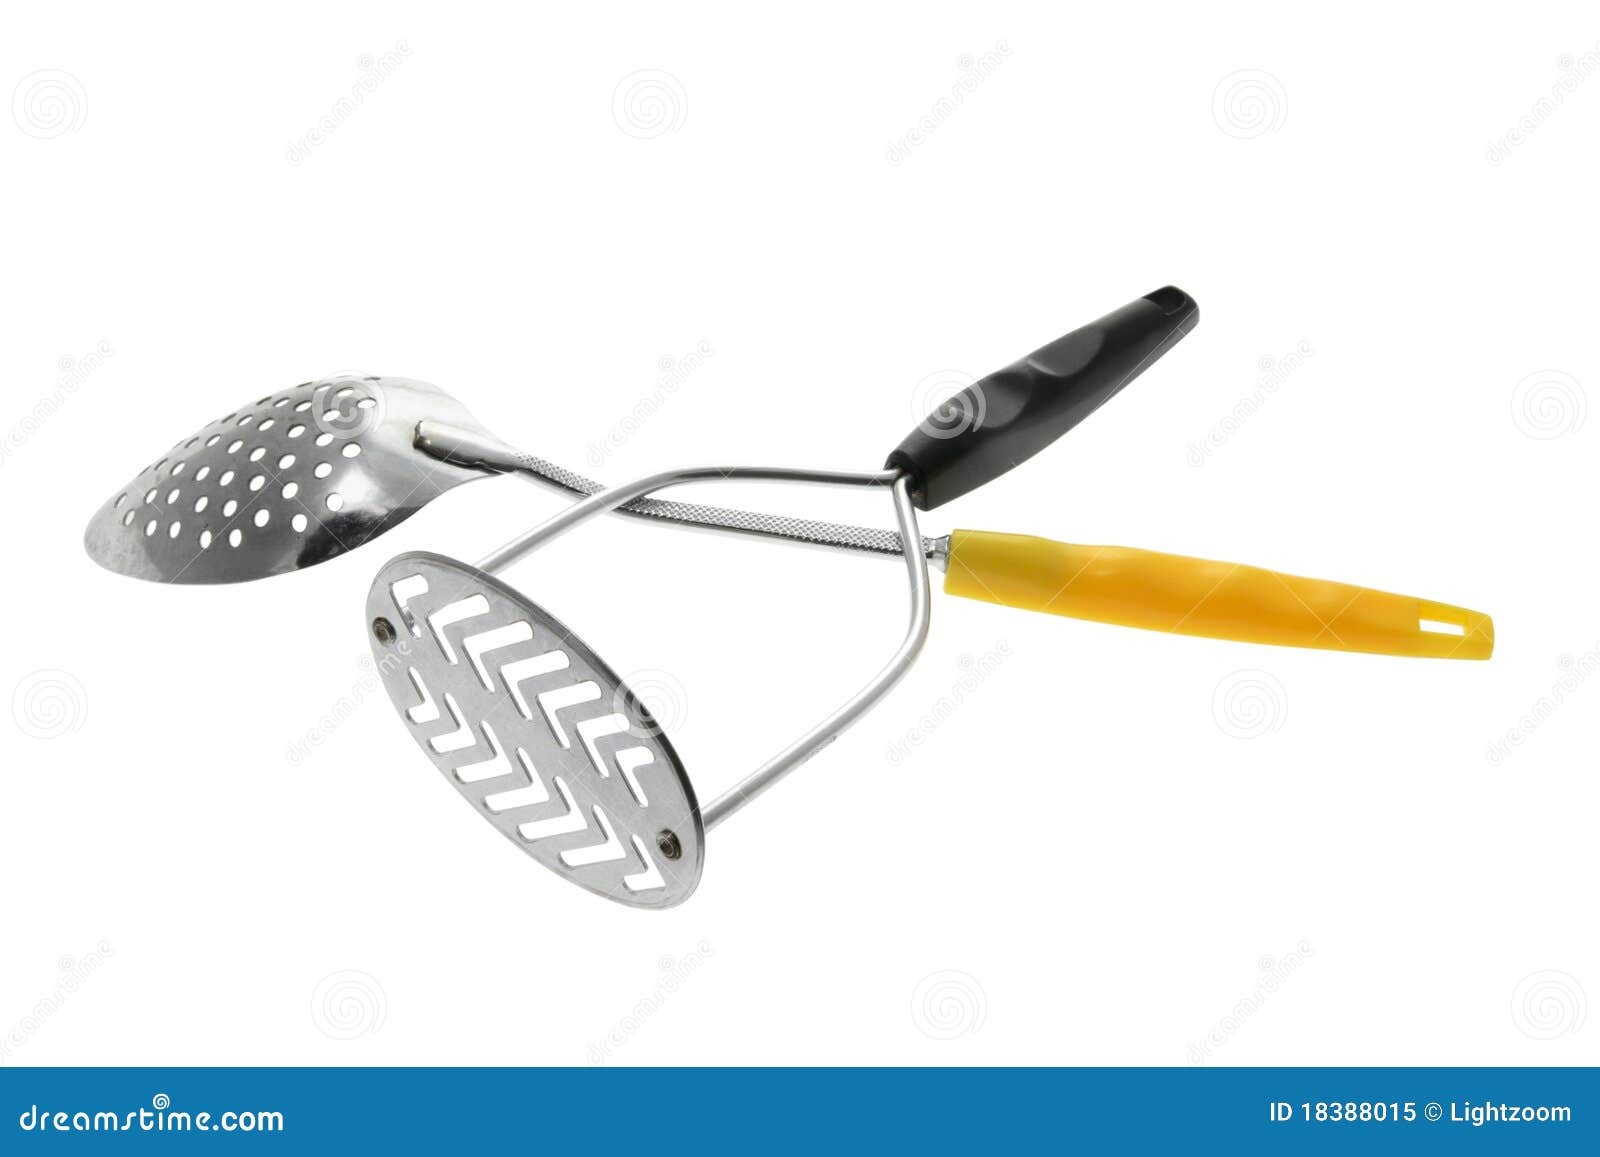 potato masher and slotted spoon